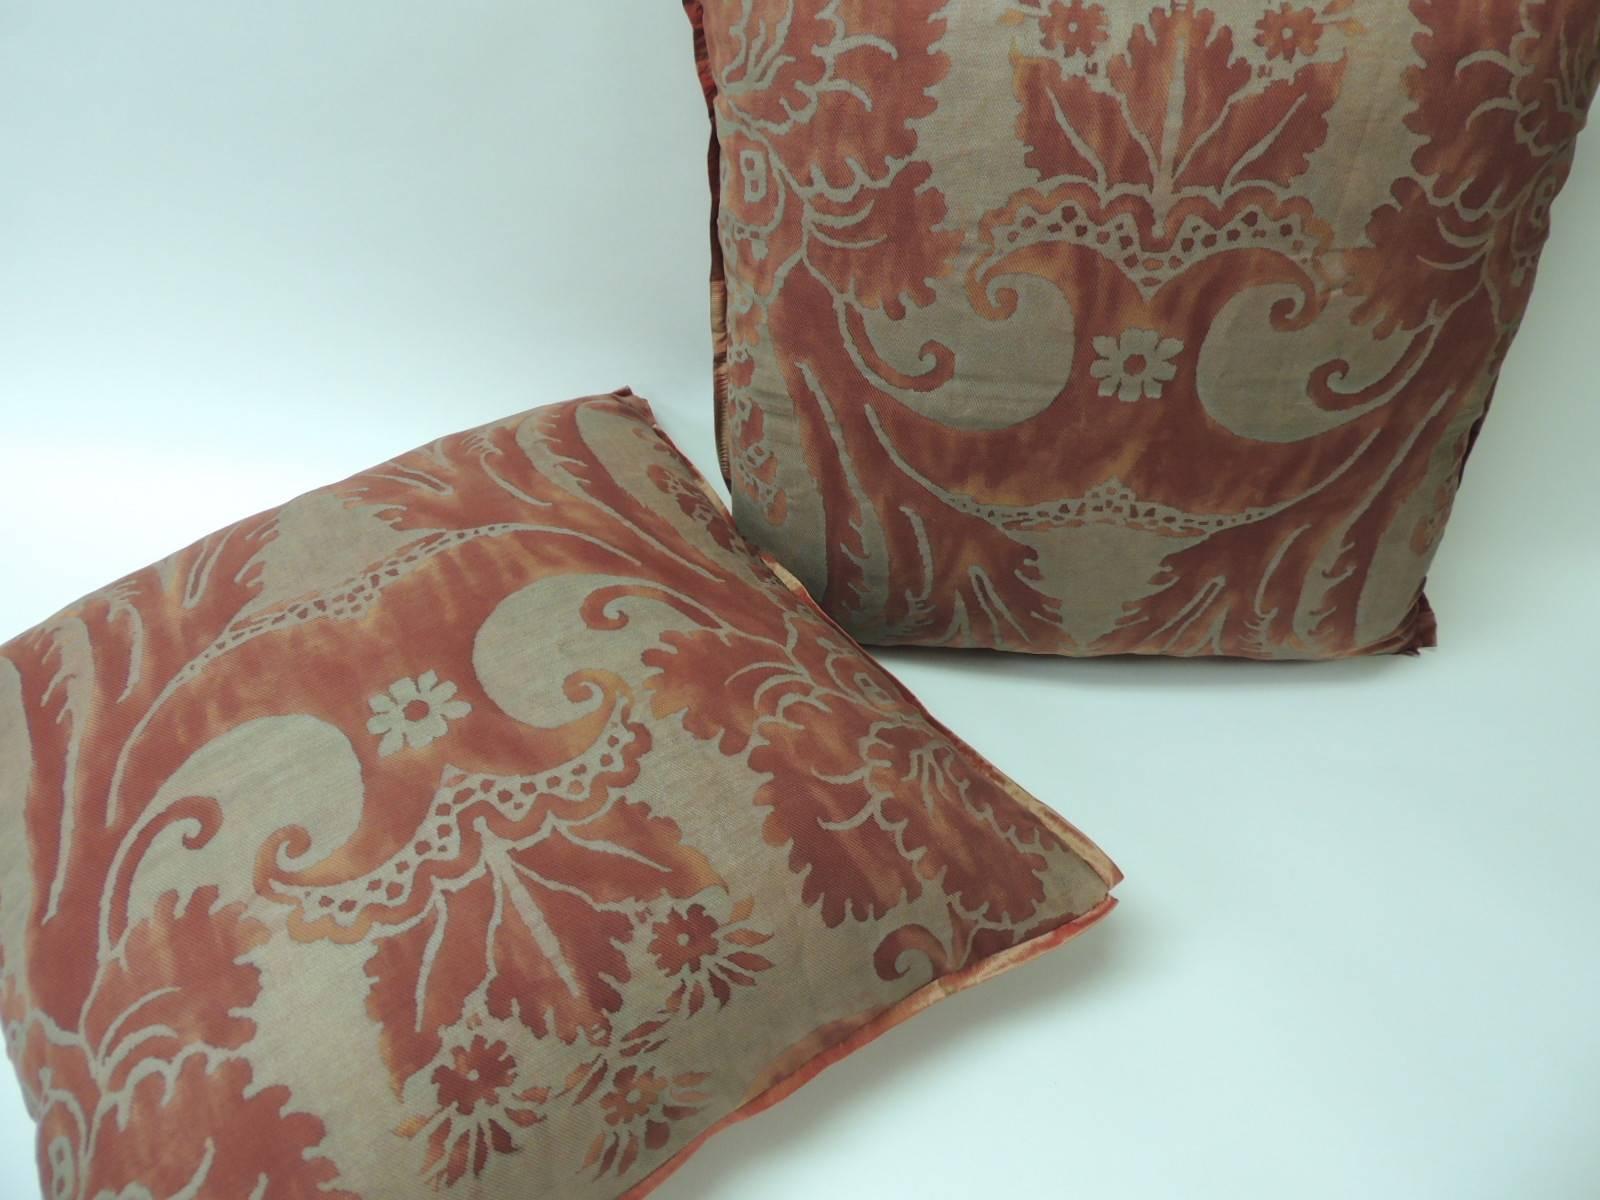 Regency Pair of Vintage Fortuny “Glicine” Pattern Red and Silvery Decorative Pillows